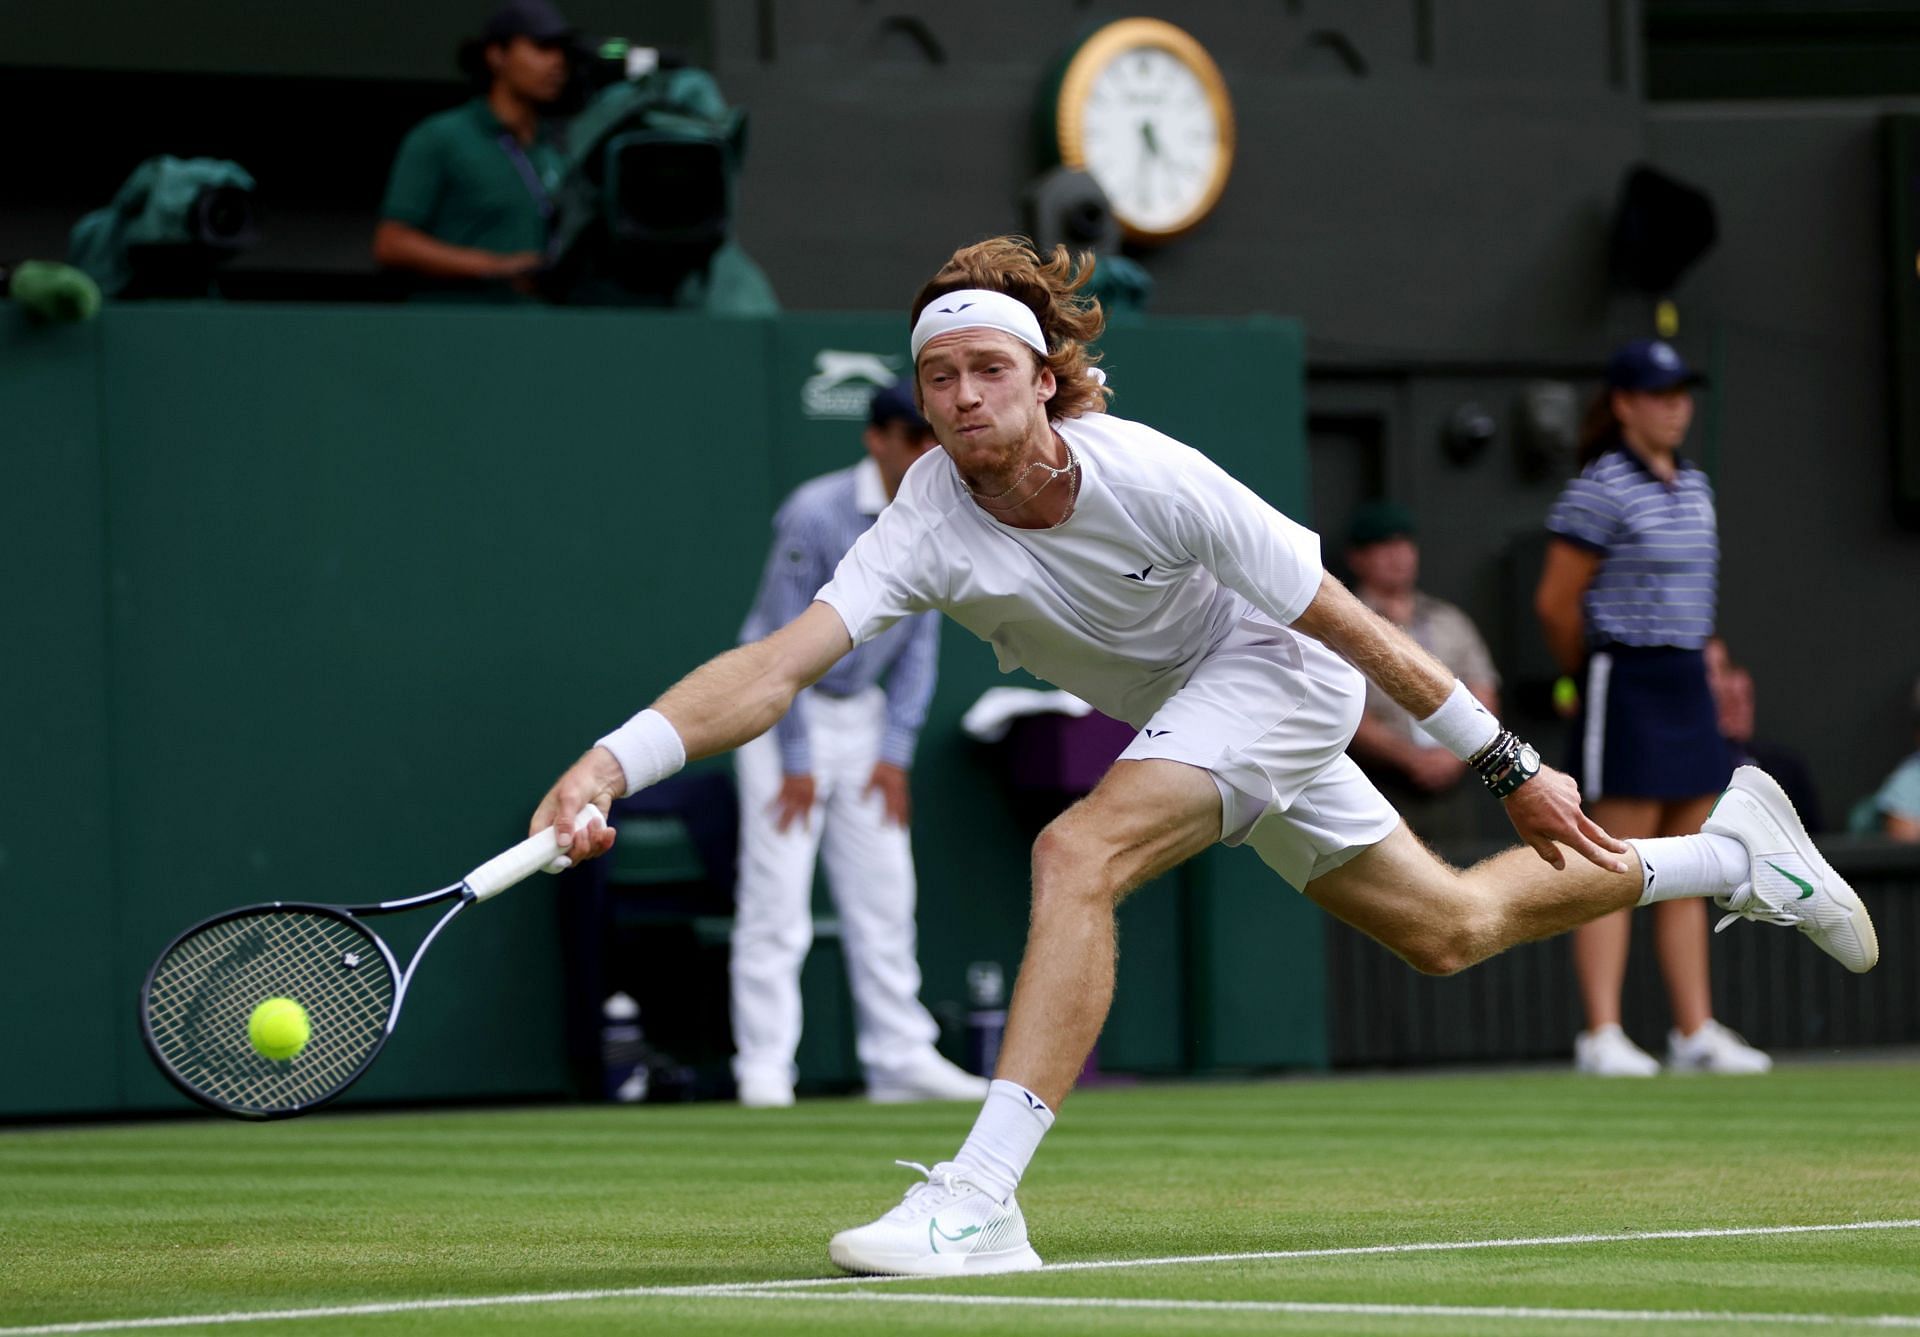 Rublev is into his first Wimbledon quarterfinal.